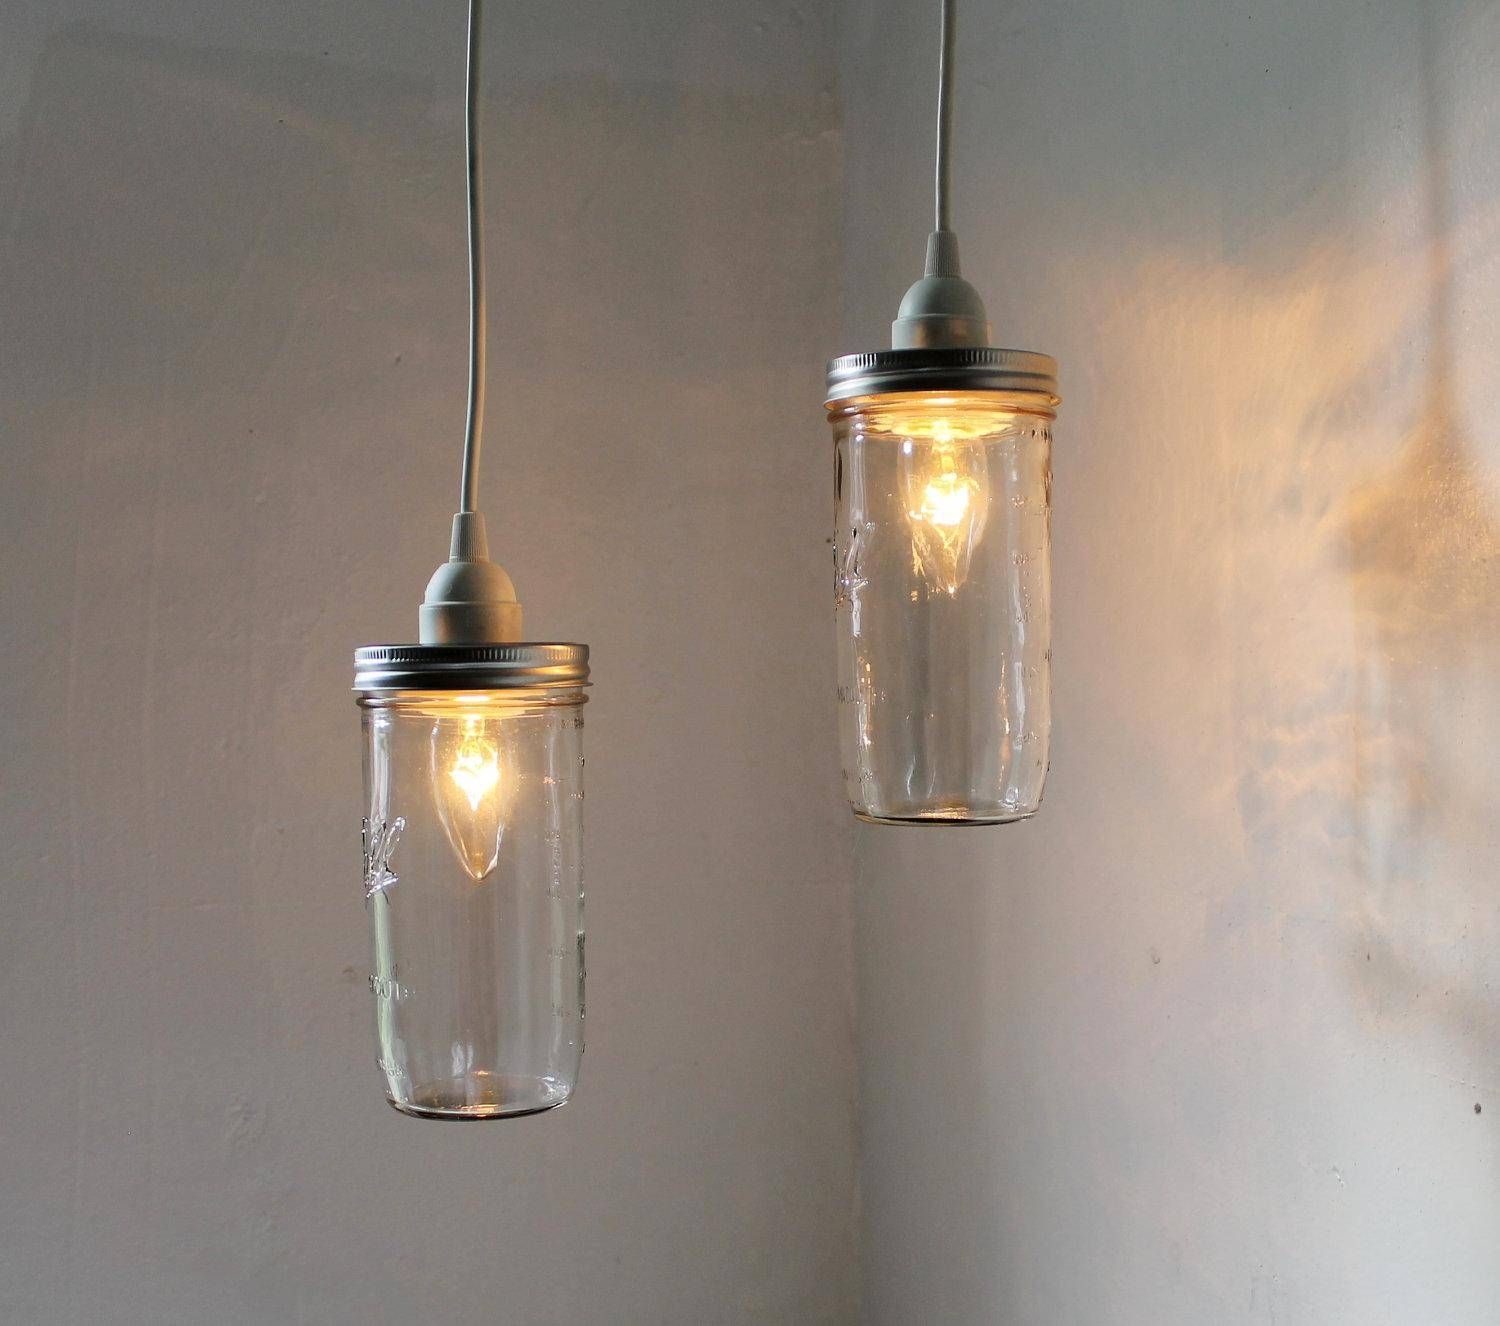 Epic Rustic Light Pendants 39 For Your Light Bulb Pendant With Regarding Rustic Light Pendants (View 14 of 15)